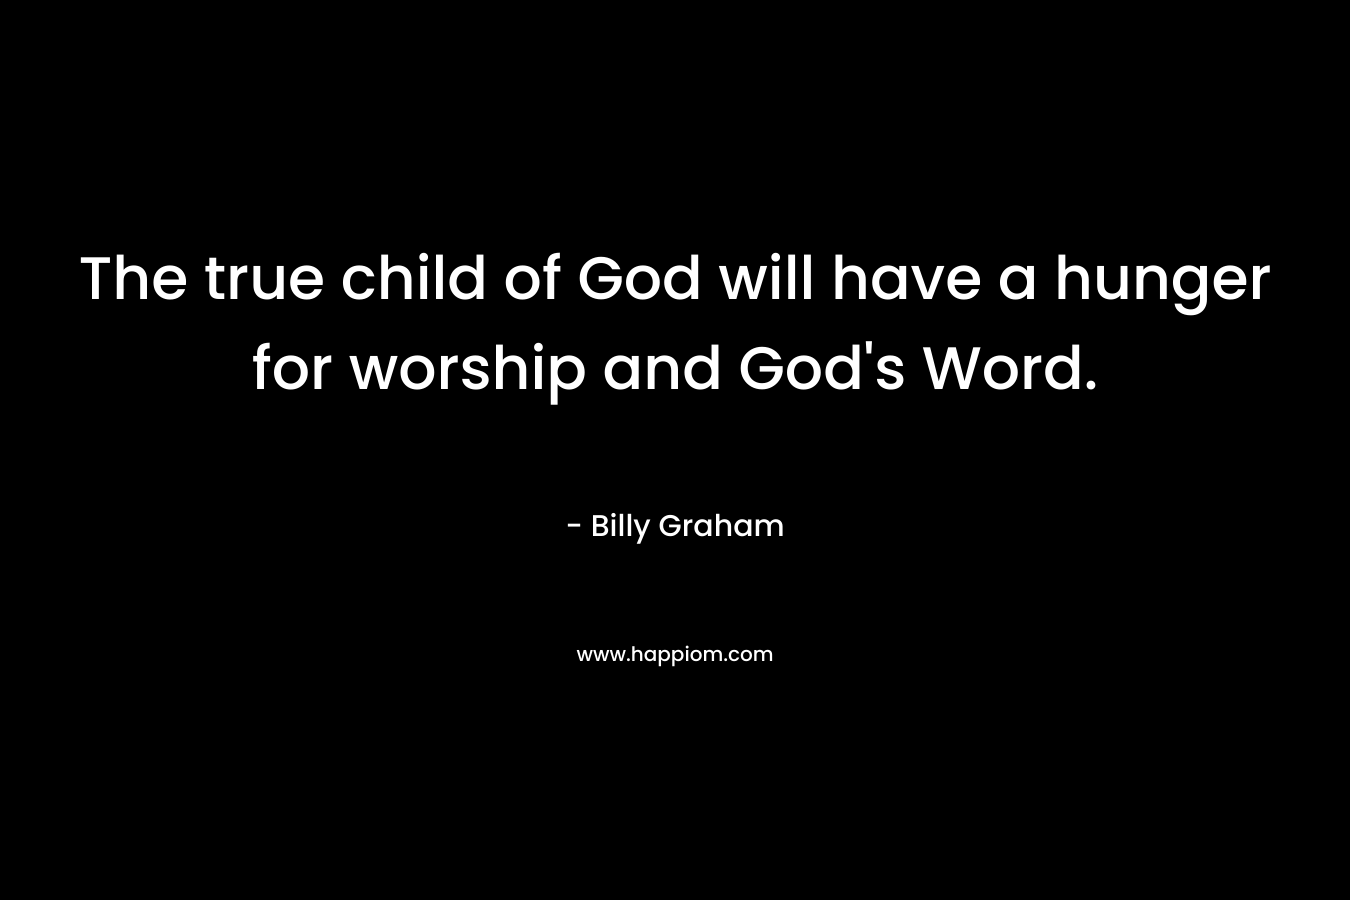 The true child of God will have a hunger for worship and God's Word.